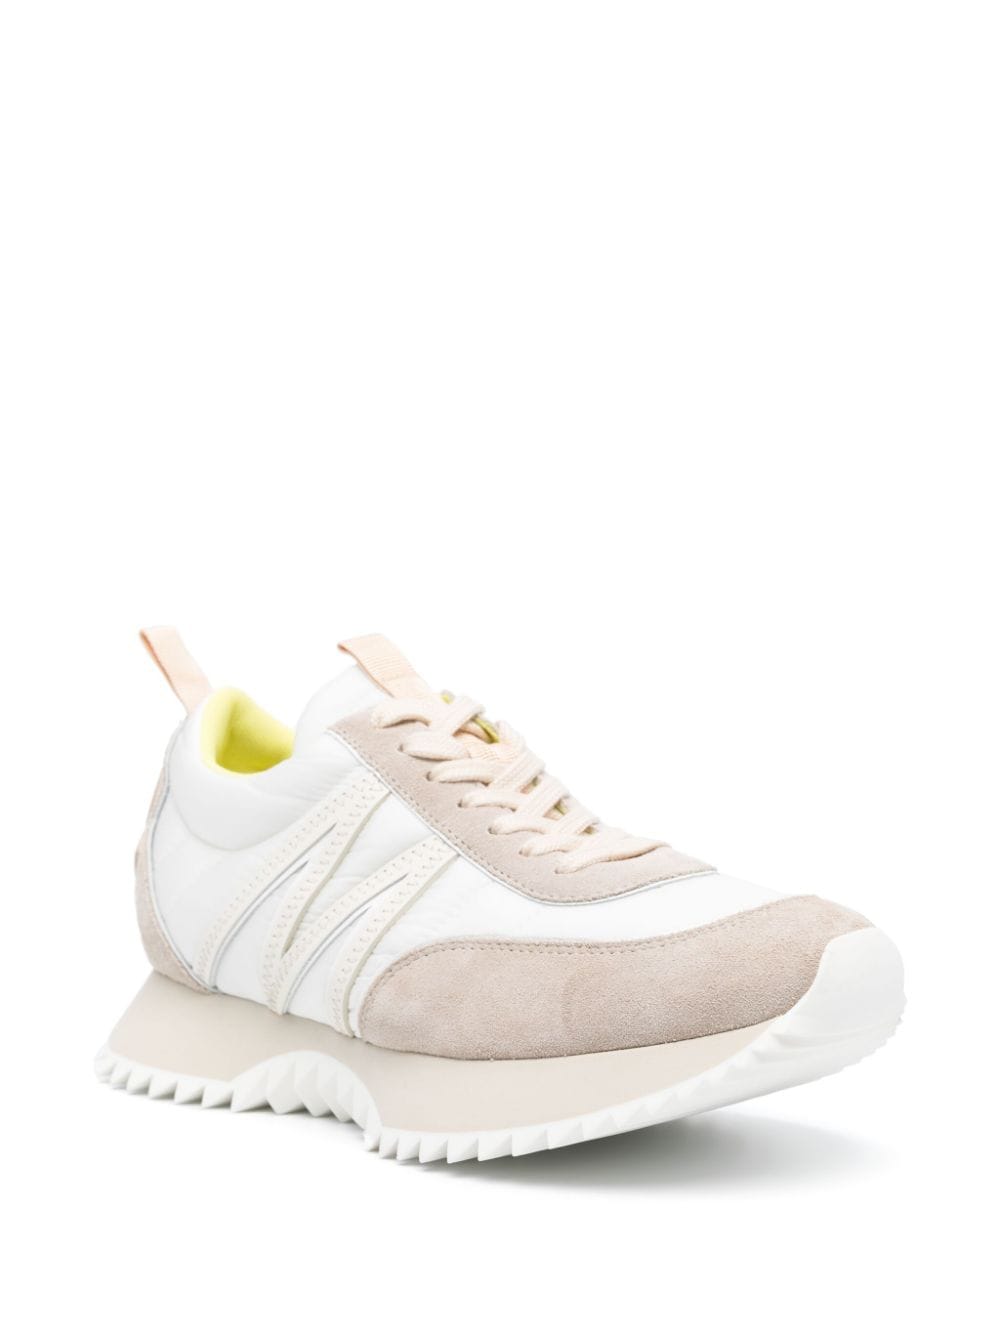 MONCLER Womens Cream White Pacey Sneakers